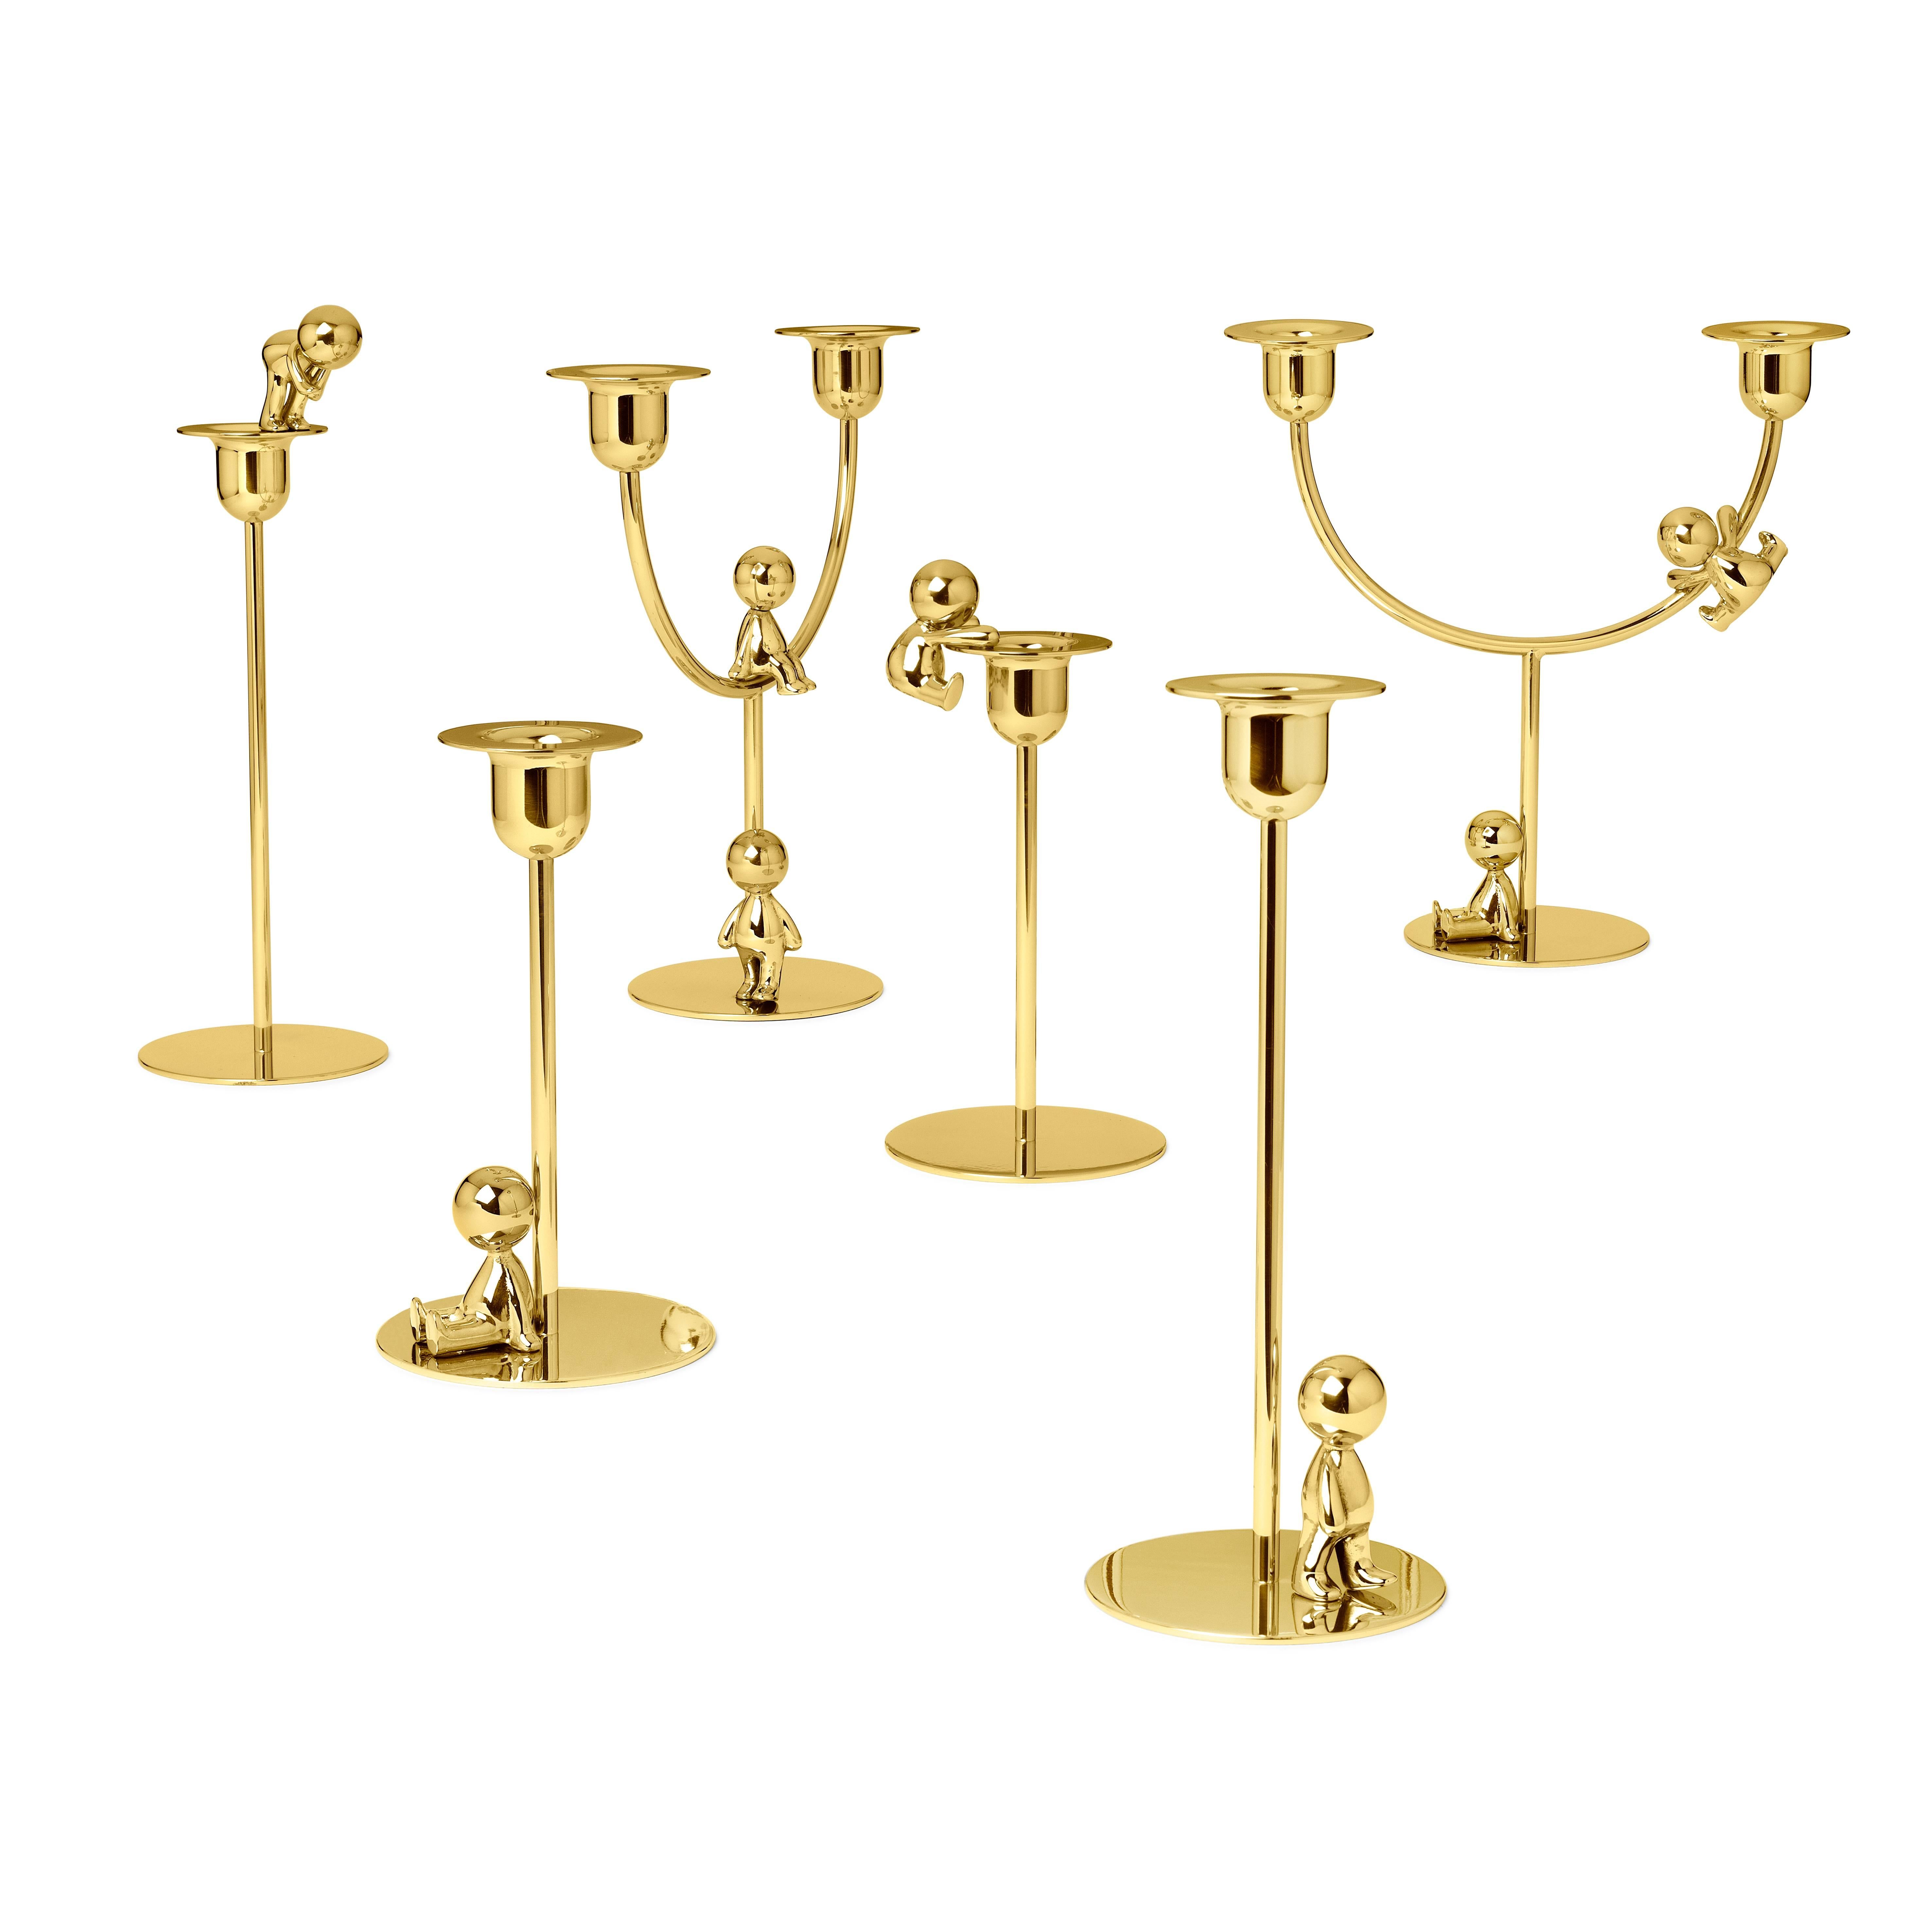 This delightful polished brass short candlestick is a creative accent for any modern interior. The streamlined design features a flat base and a long column accented by a bulbed bobeche with a wide rim. A small, stylized man sits atop the bobeche,